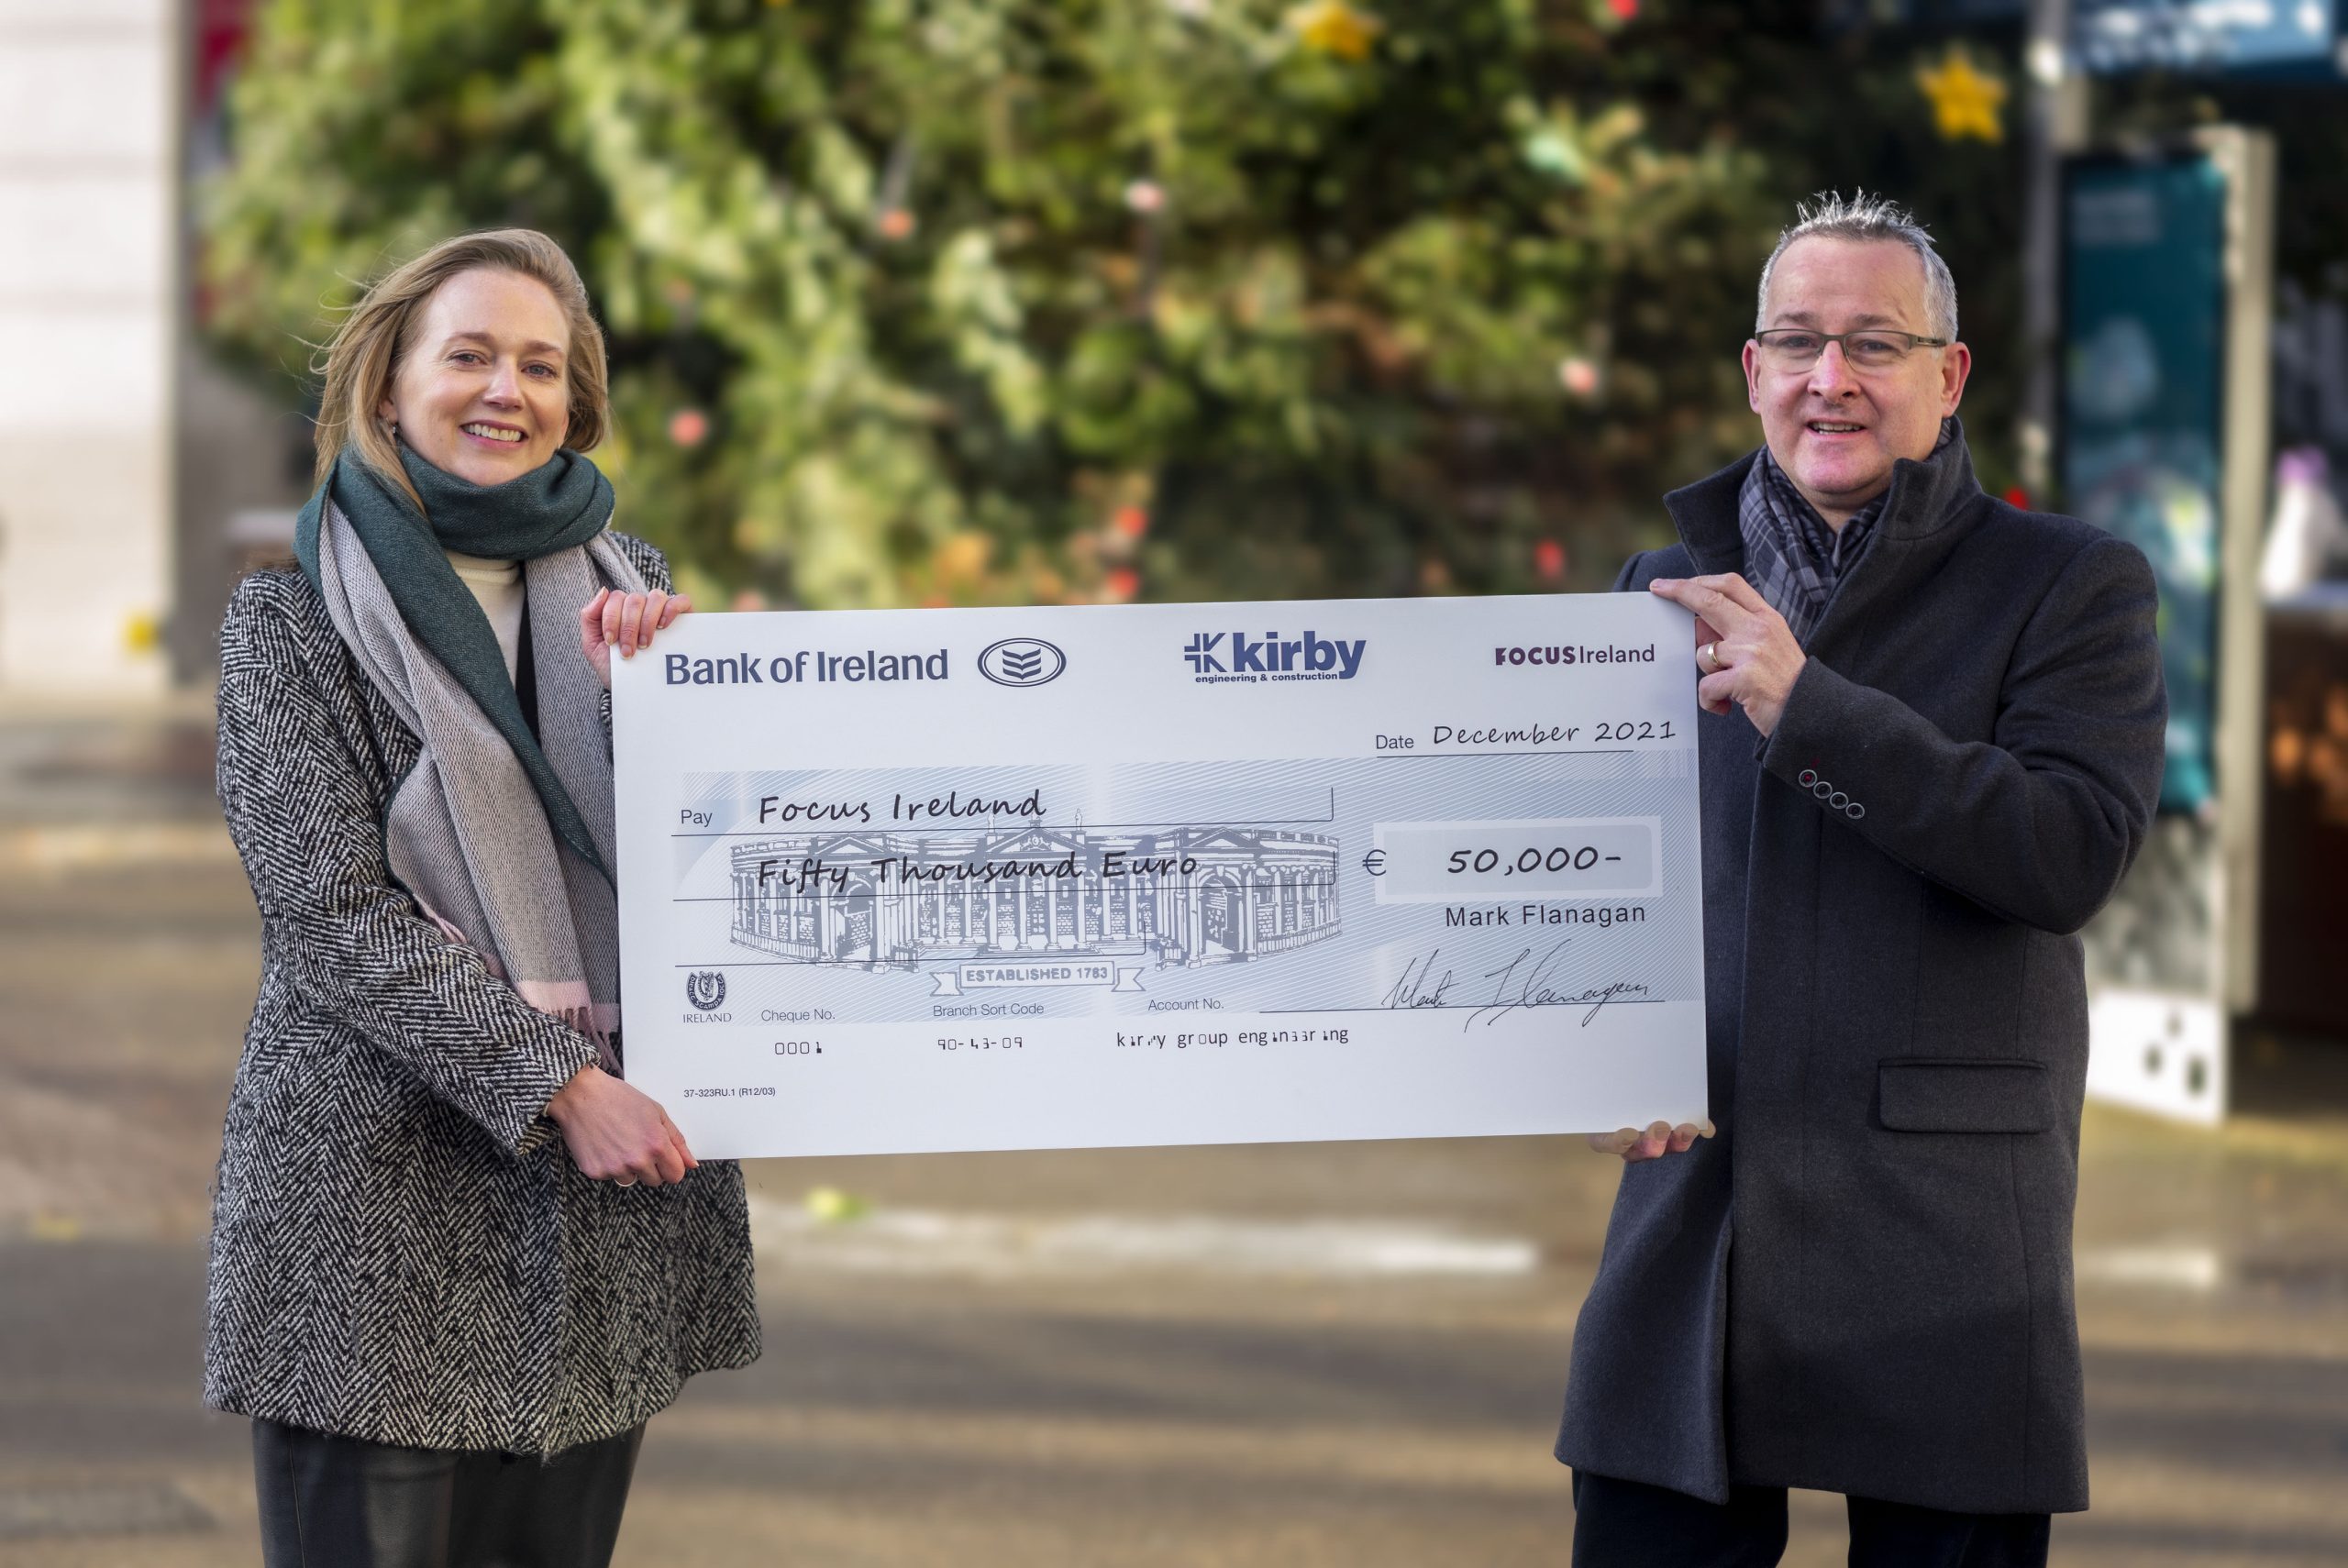 Kirby Group Managing Director, Mark Flanagan, presents Amy Carr, Director of Fundraising and Marketing of Focus Ireland, with a Christmas donation cheque for €50,000